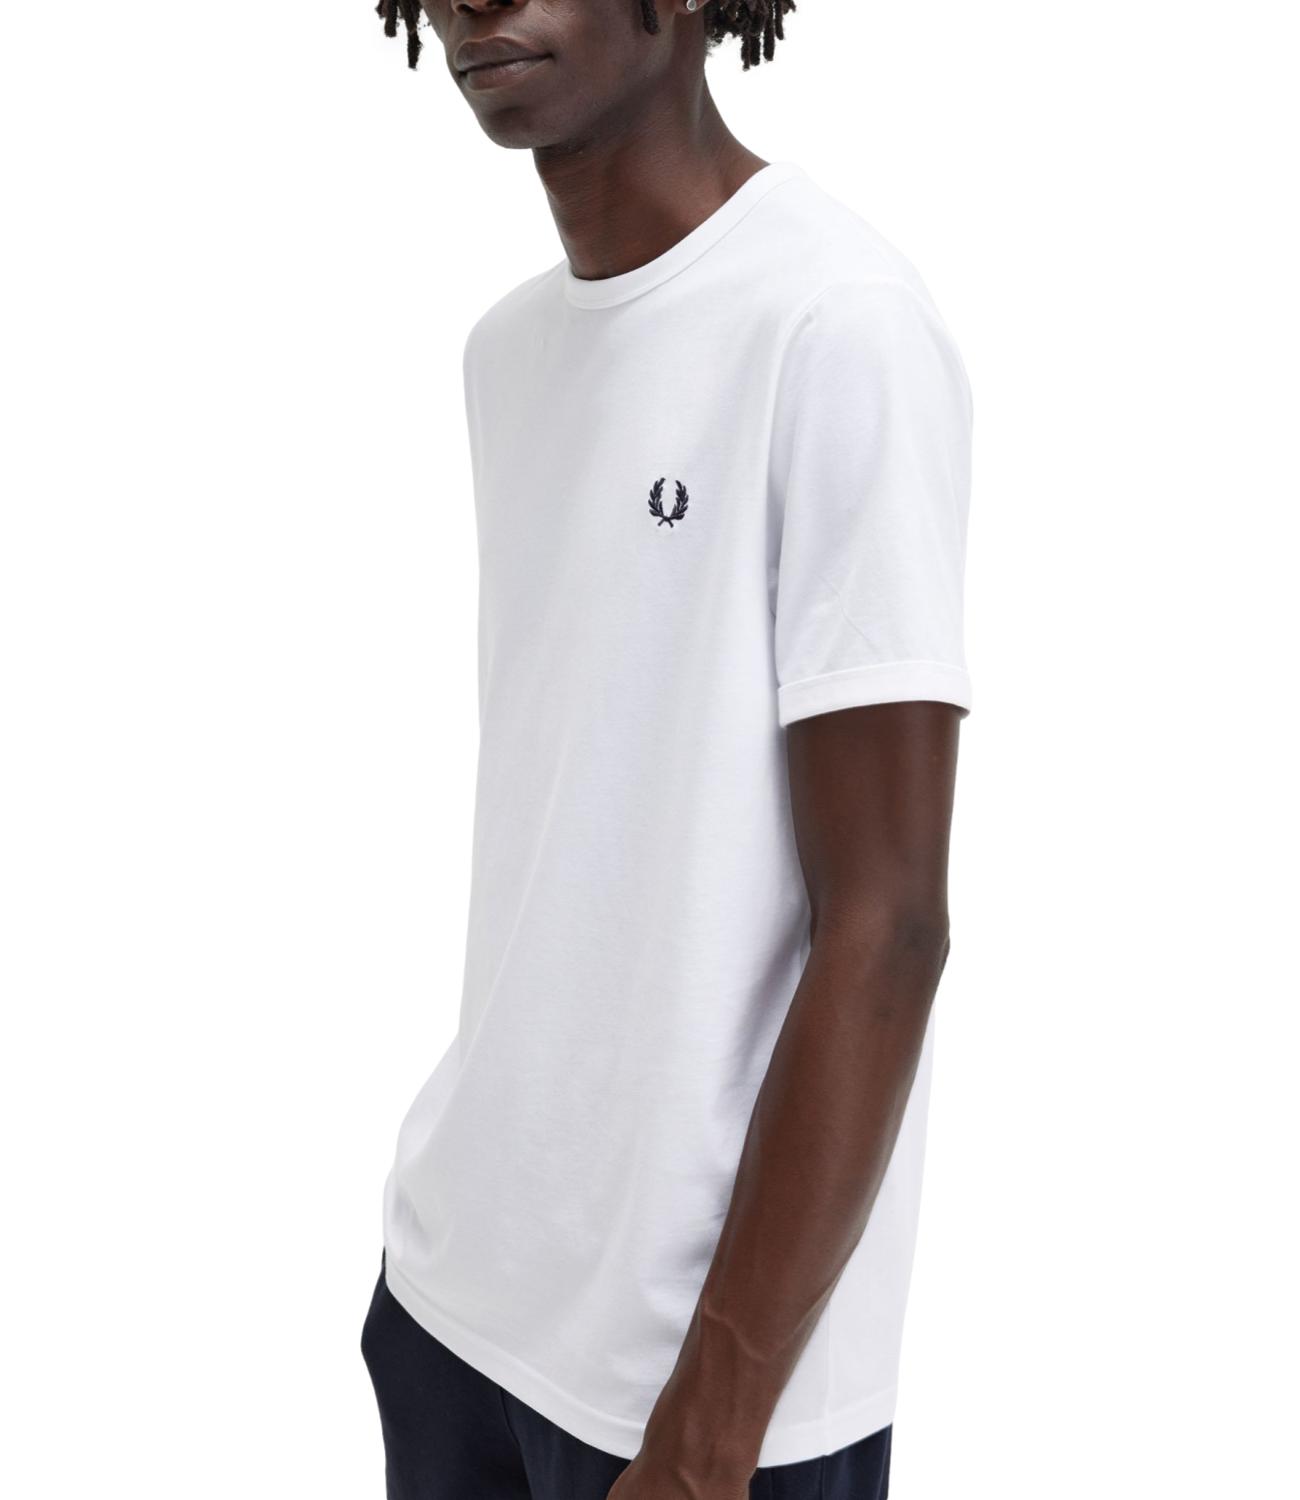 Fred Perry t-shirt bianca uomo